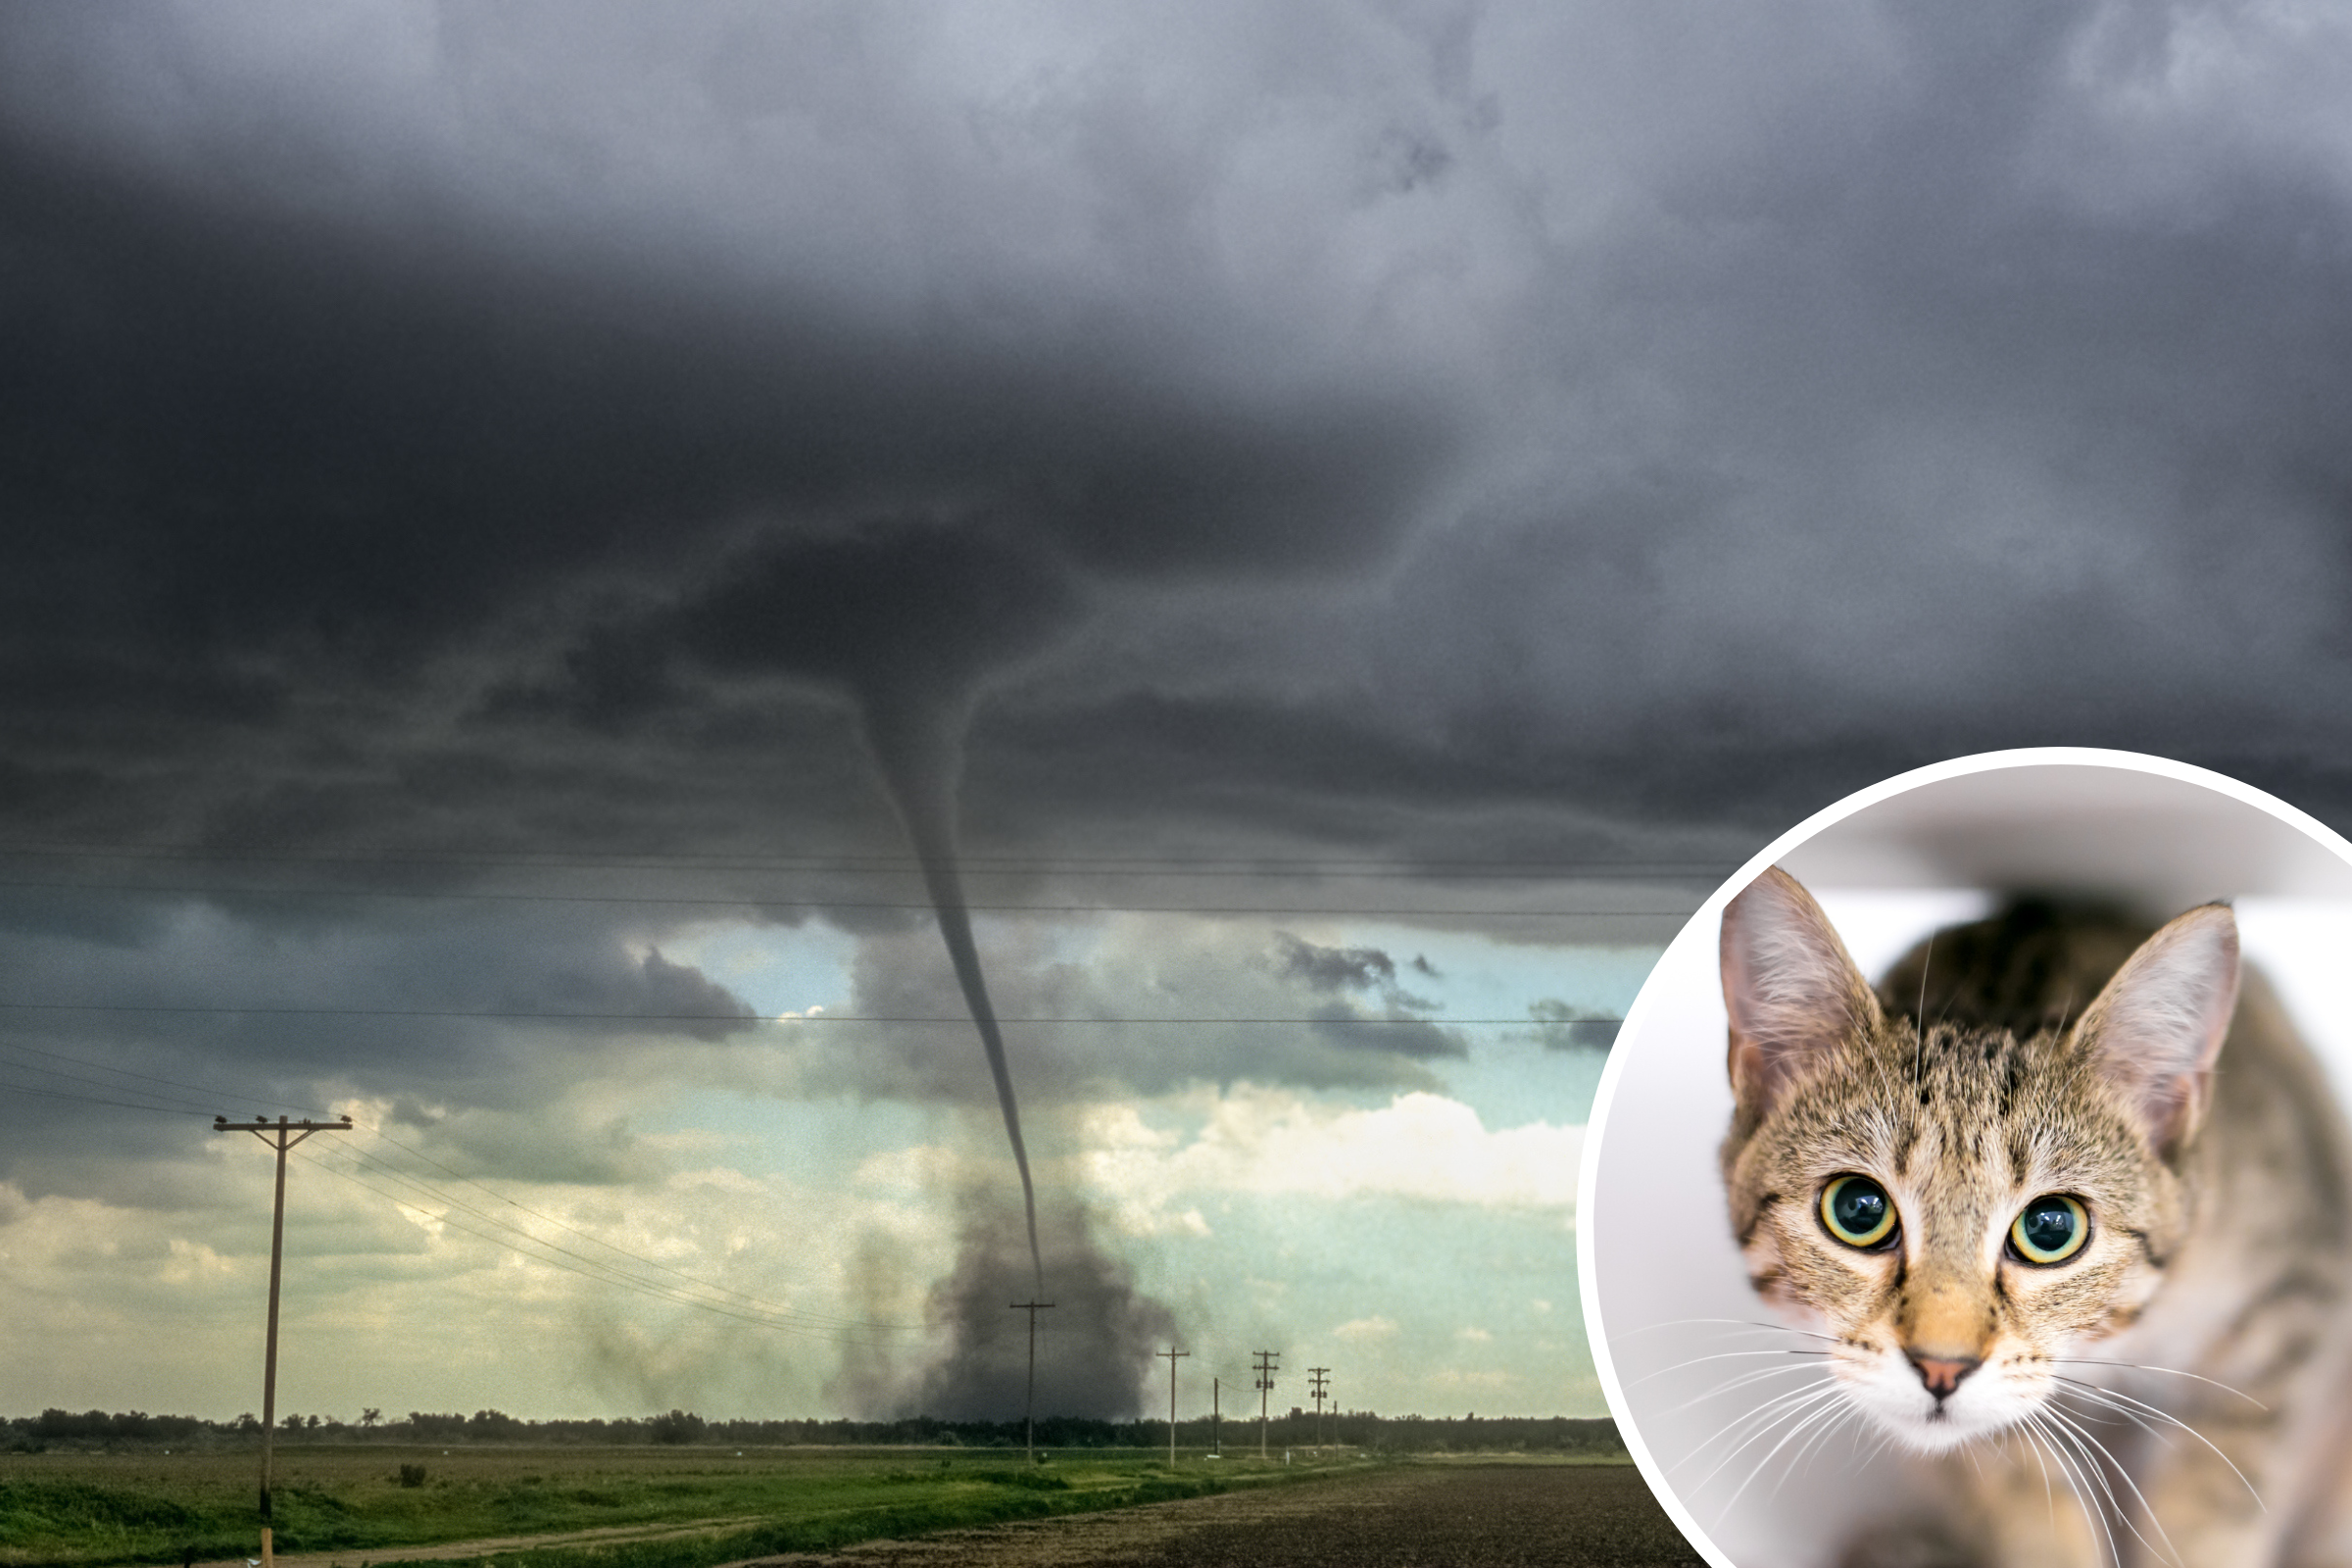 Tornado Safety for Pets